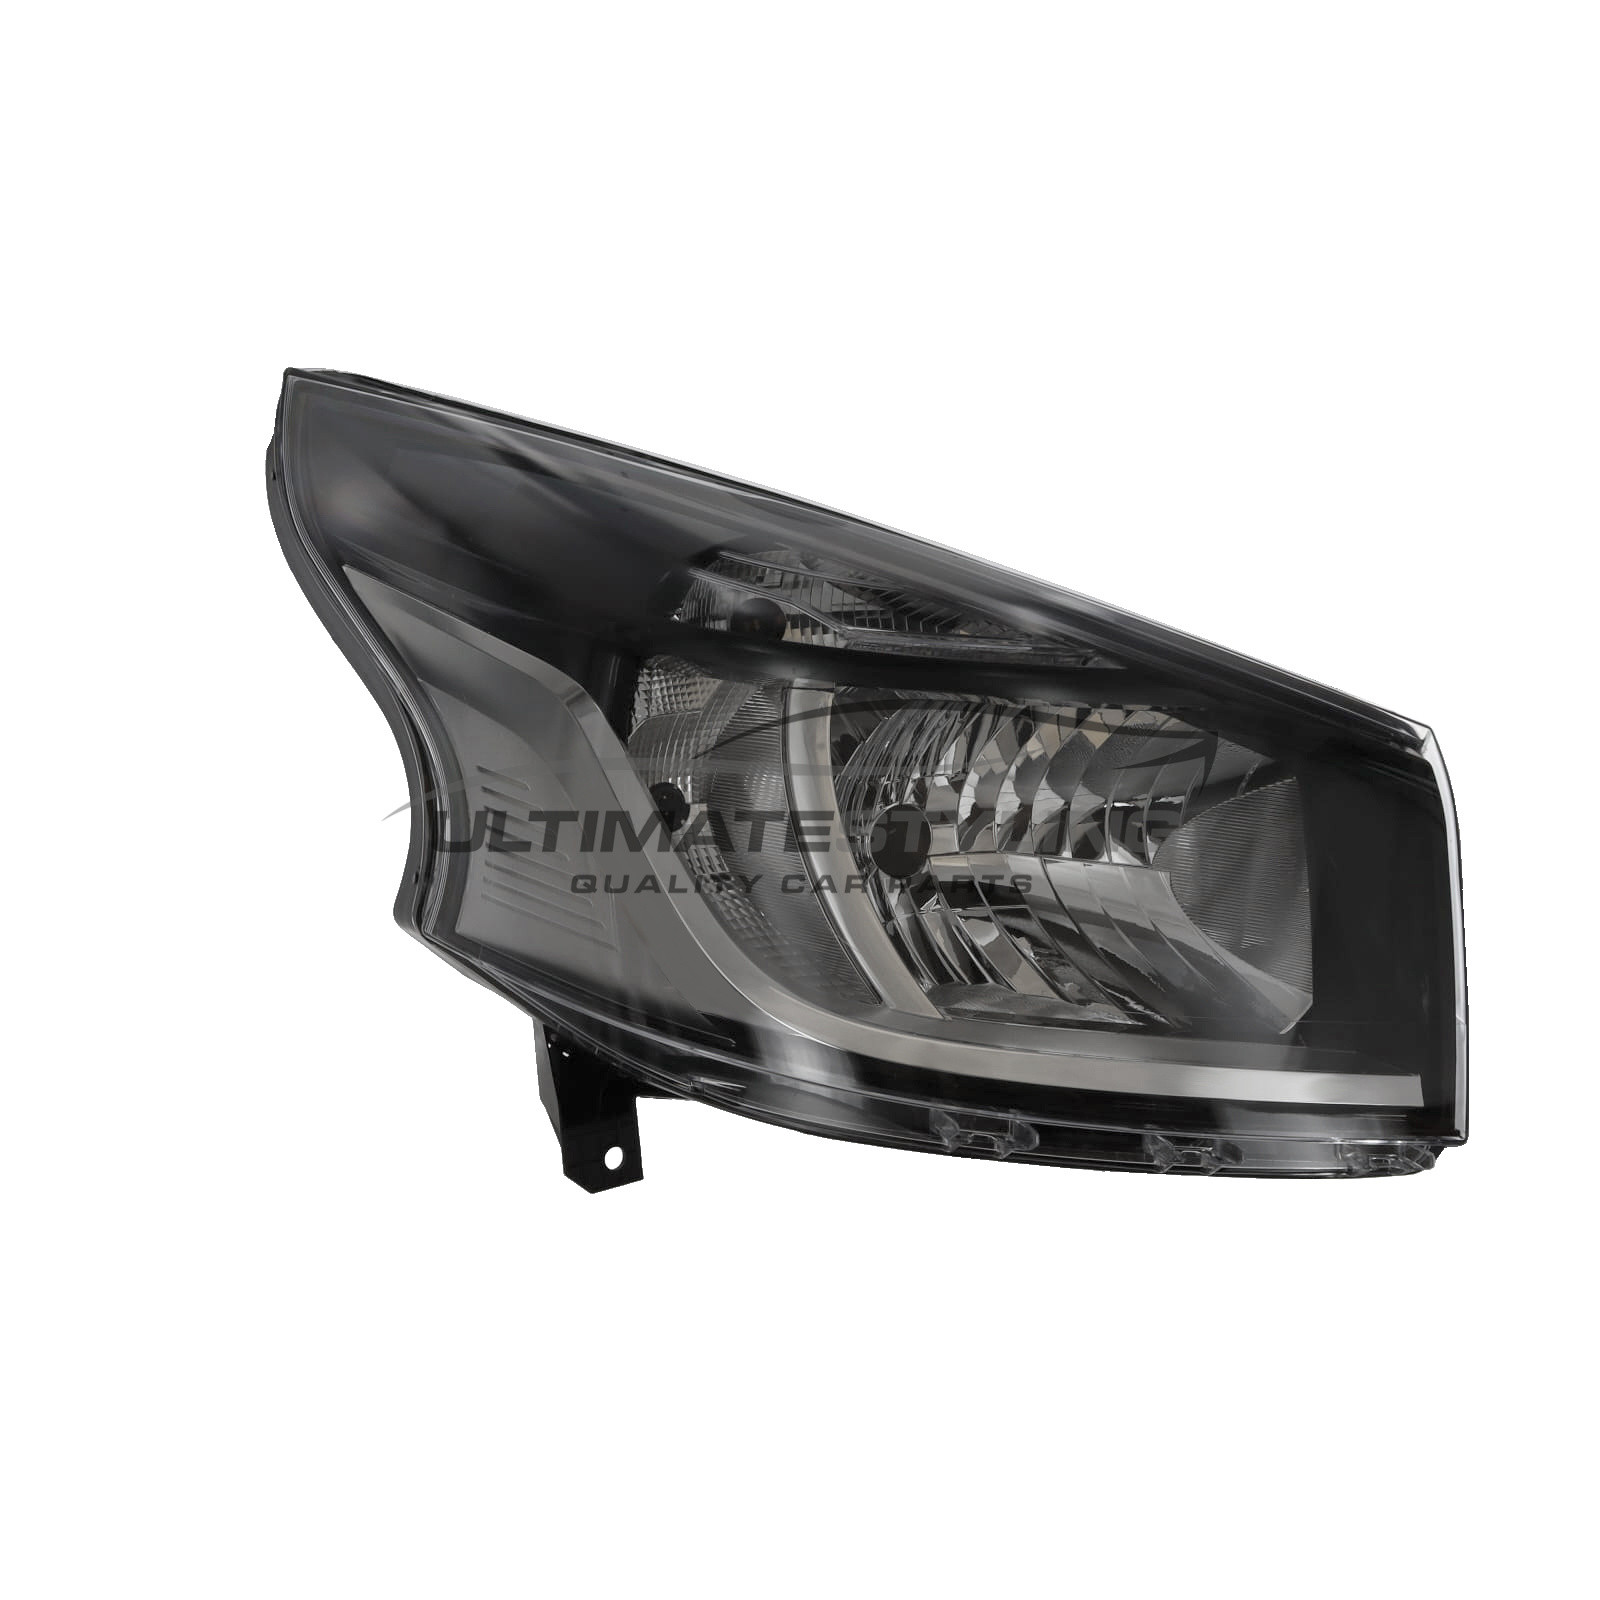 Fiat Talento 2016->, Nissan NV300 2014->, Renault Trafic 2014-> Halogen, Electric Without Motor, Chrome Headlight / Headlamp with Black Surround Drivers Side (RH)